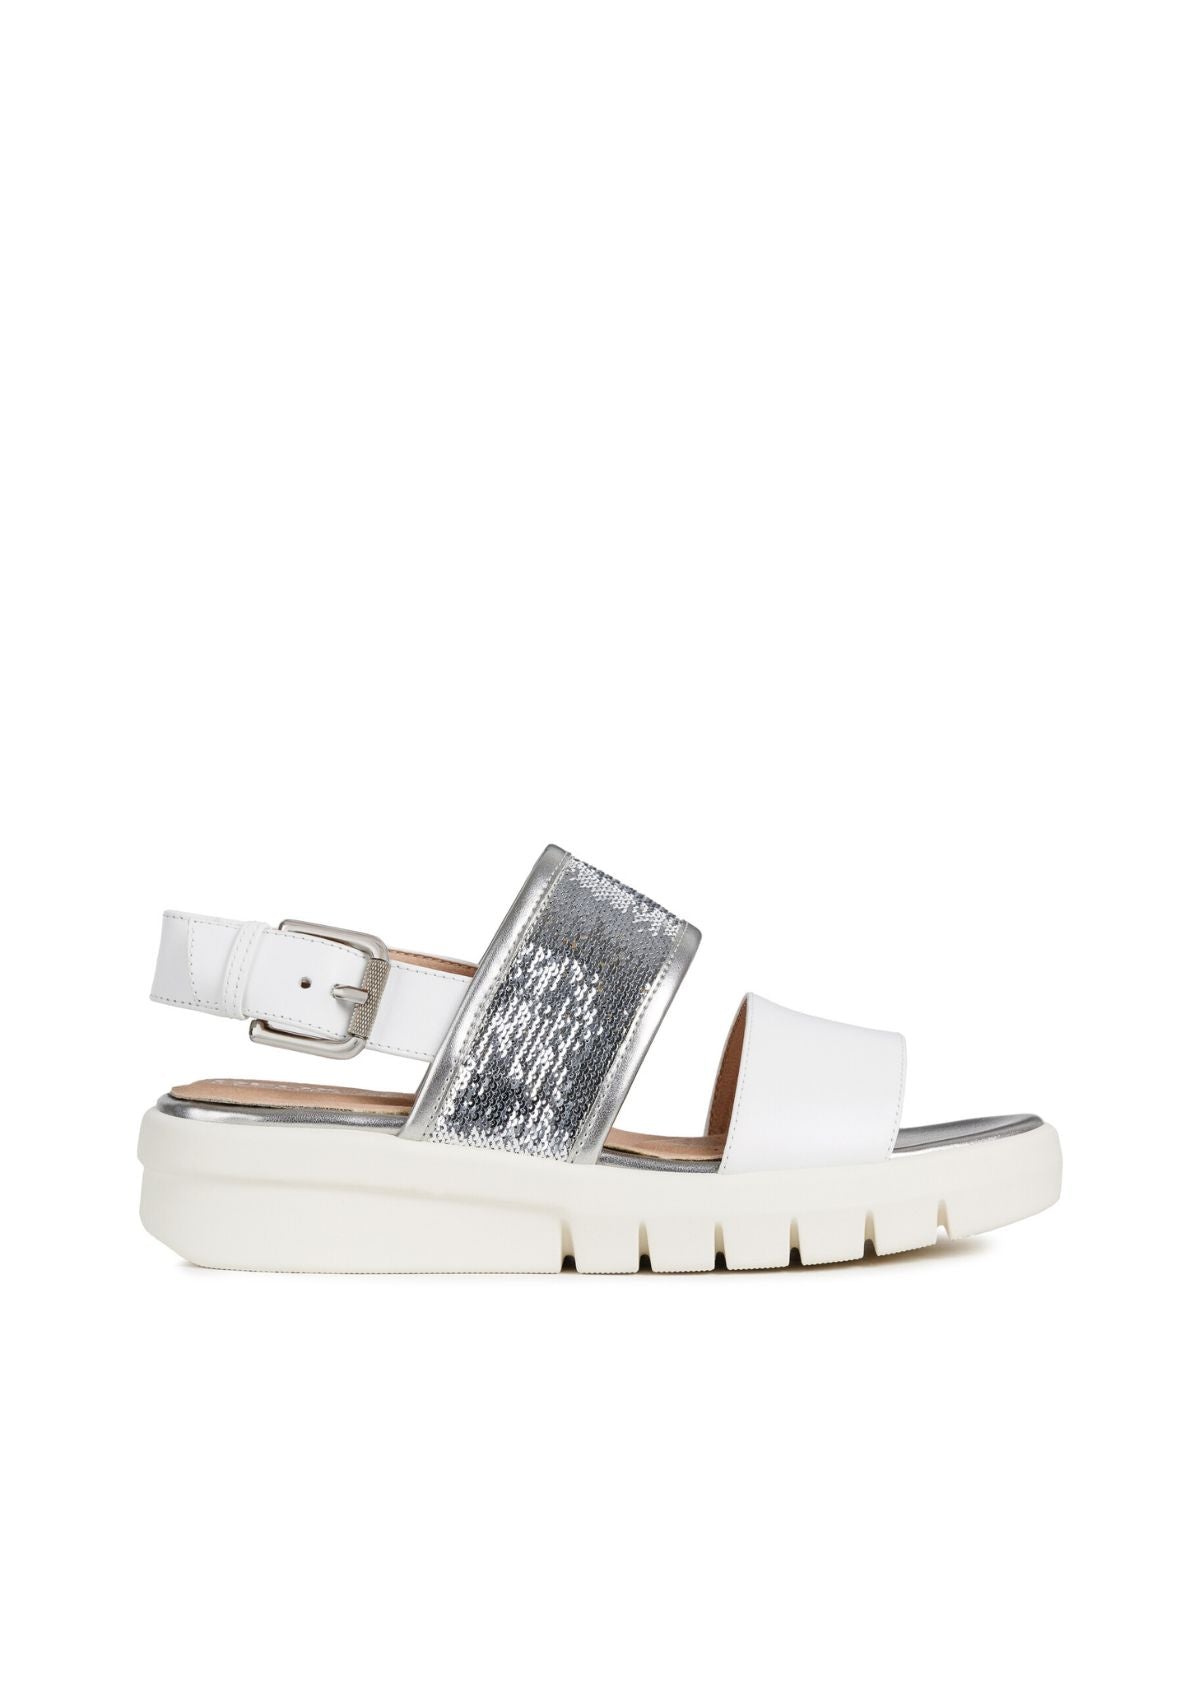 Geox Woman Sandals WEMBLEY White Silver side